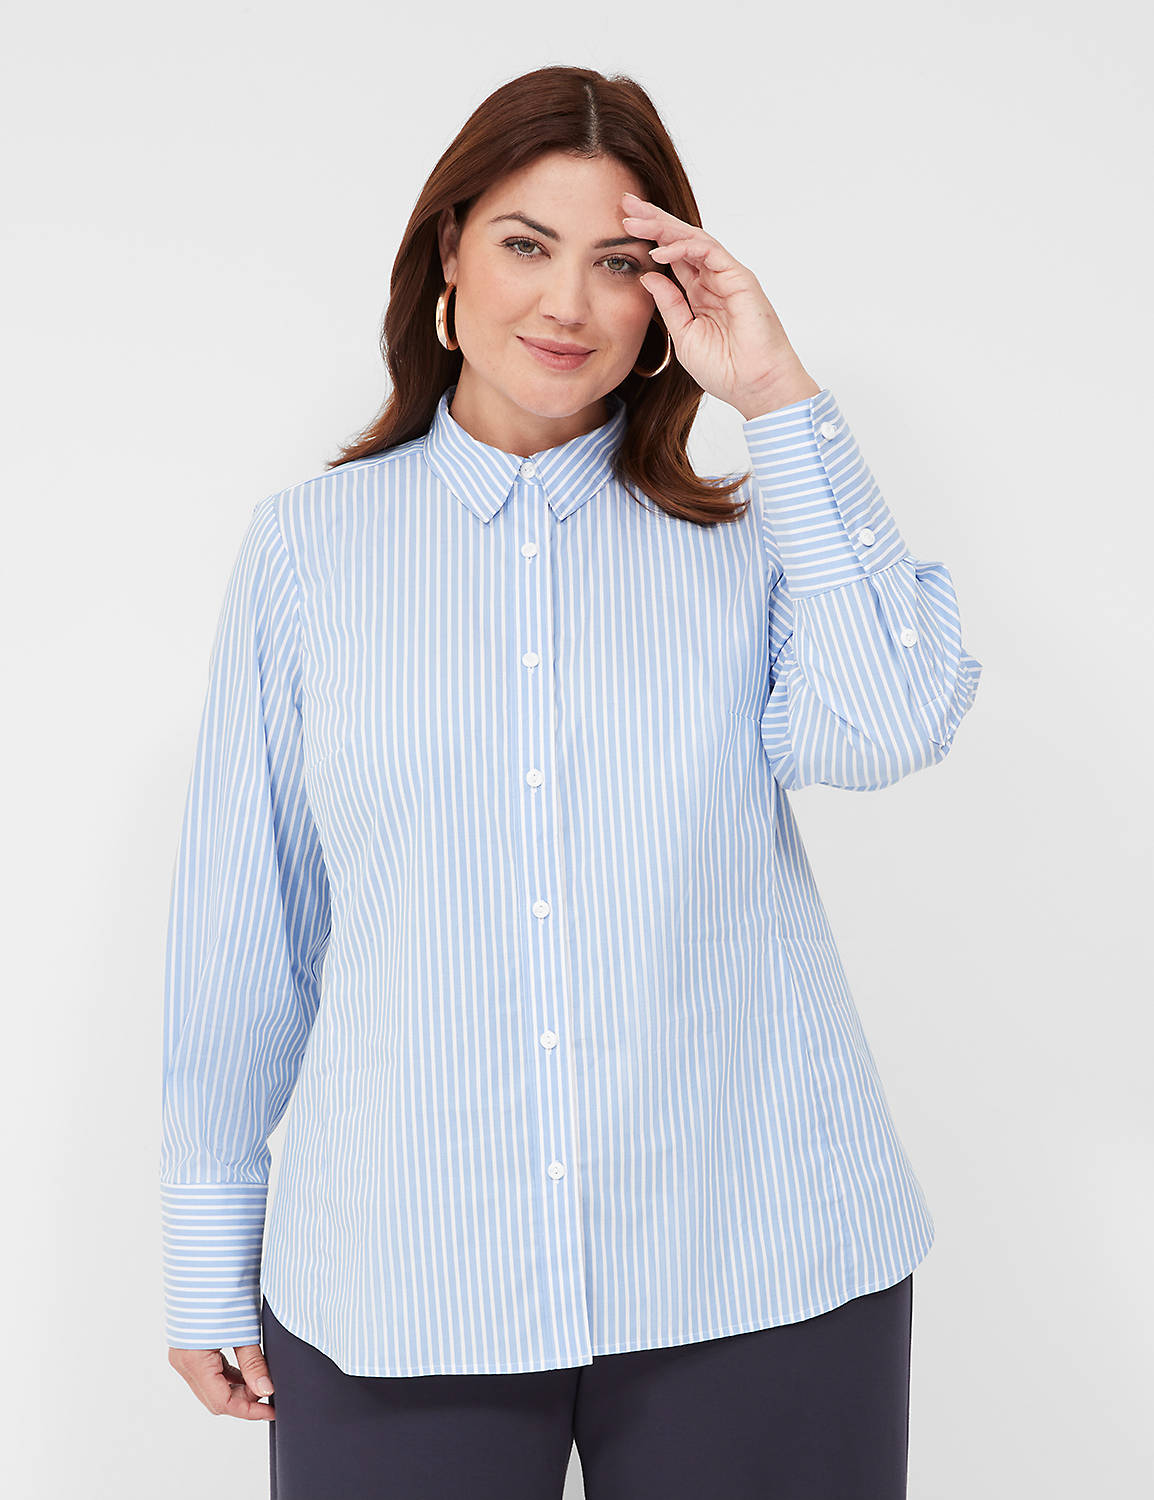 Classic Long Sleeve Button Down Gir Product Image 1